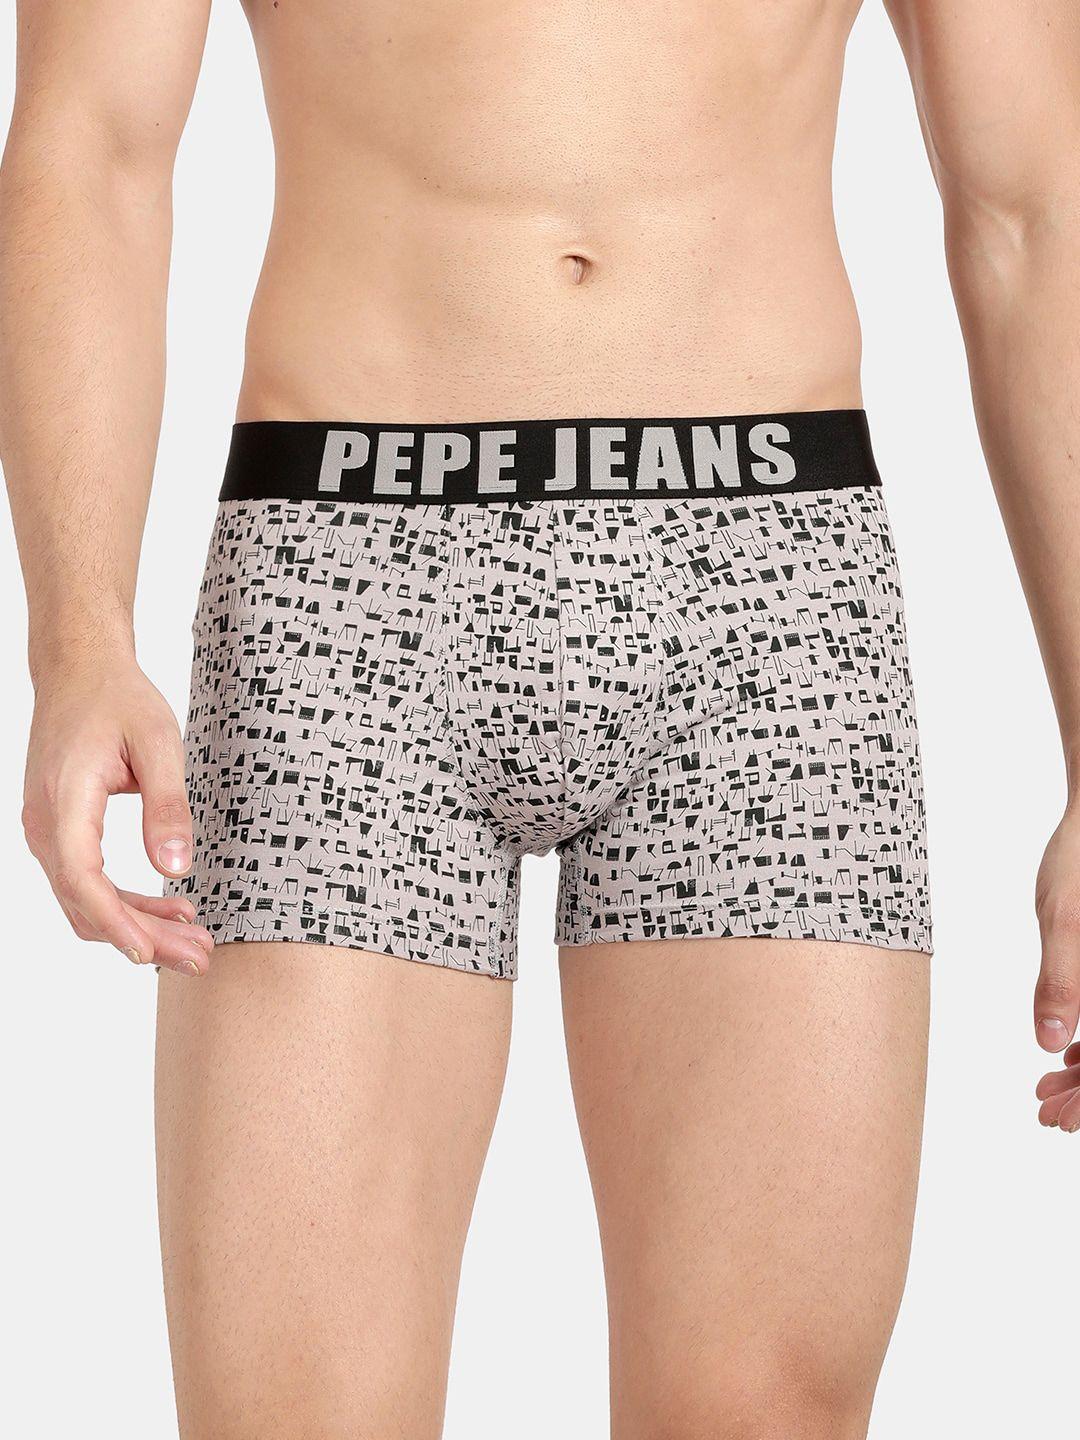 pepe-jeans-men-grey-printed-cotton-trunk-opt01-p-mid-grey-aop-1-s